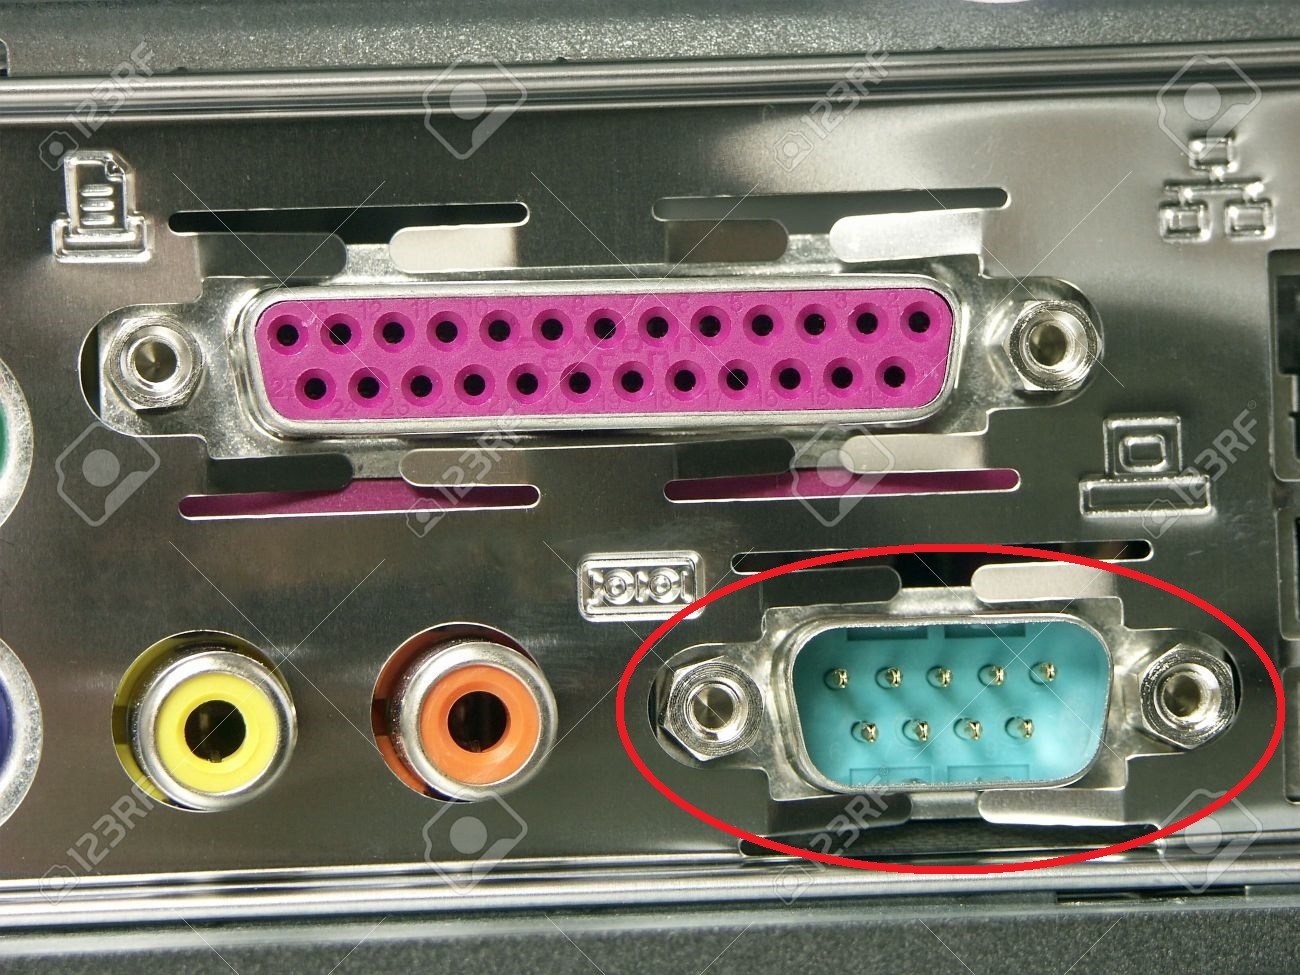 3654423-closeup-of-pc-connection-ports-at-the-computer-rear-panel.jpg